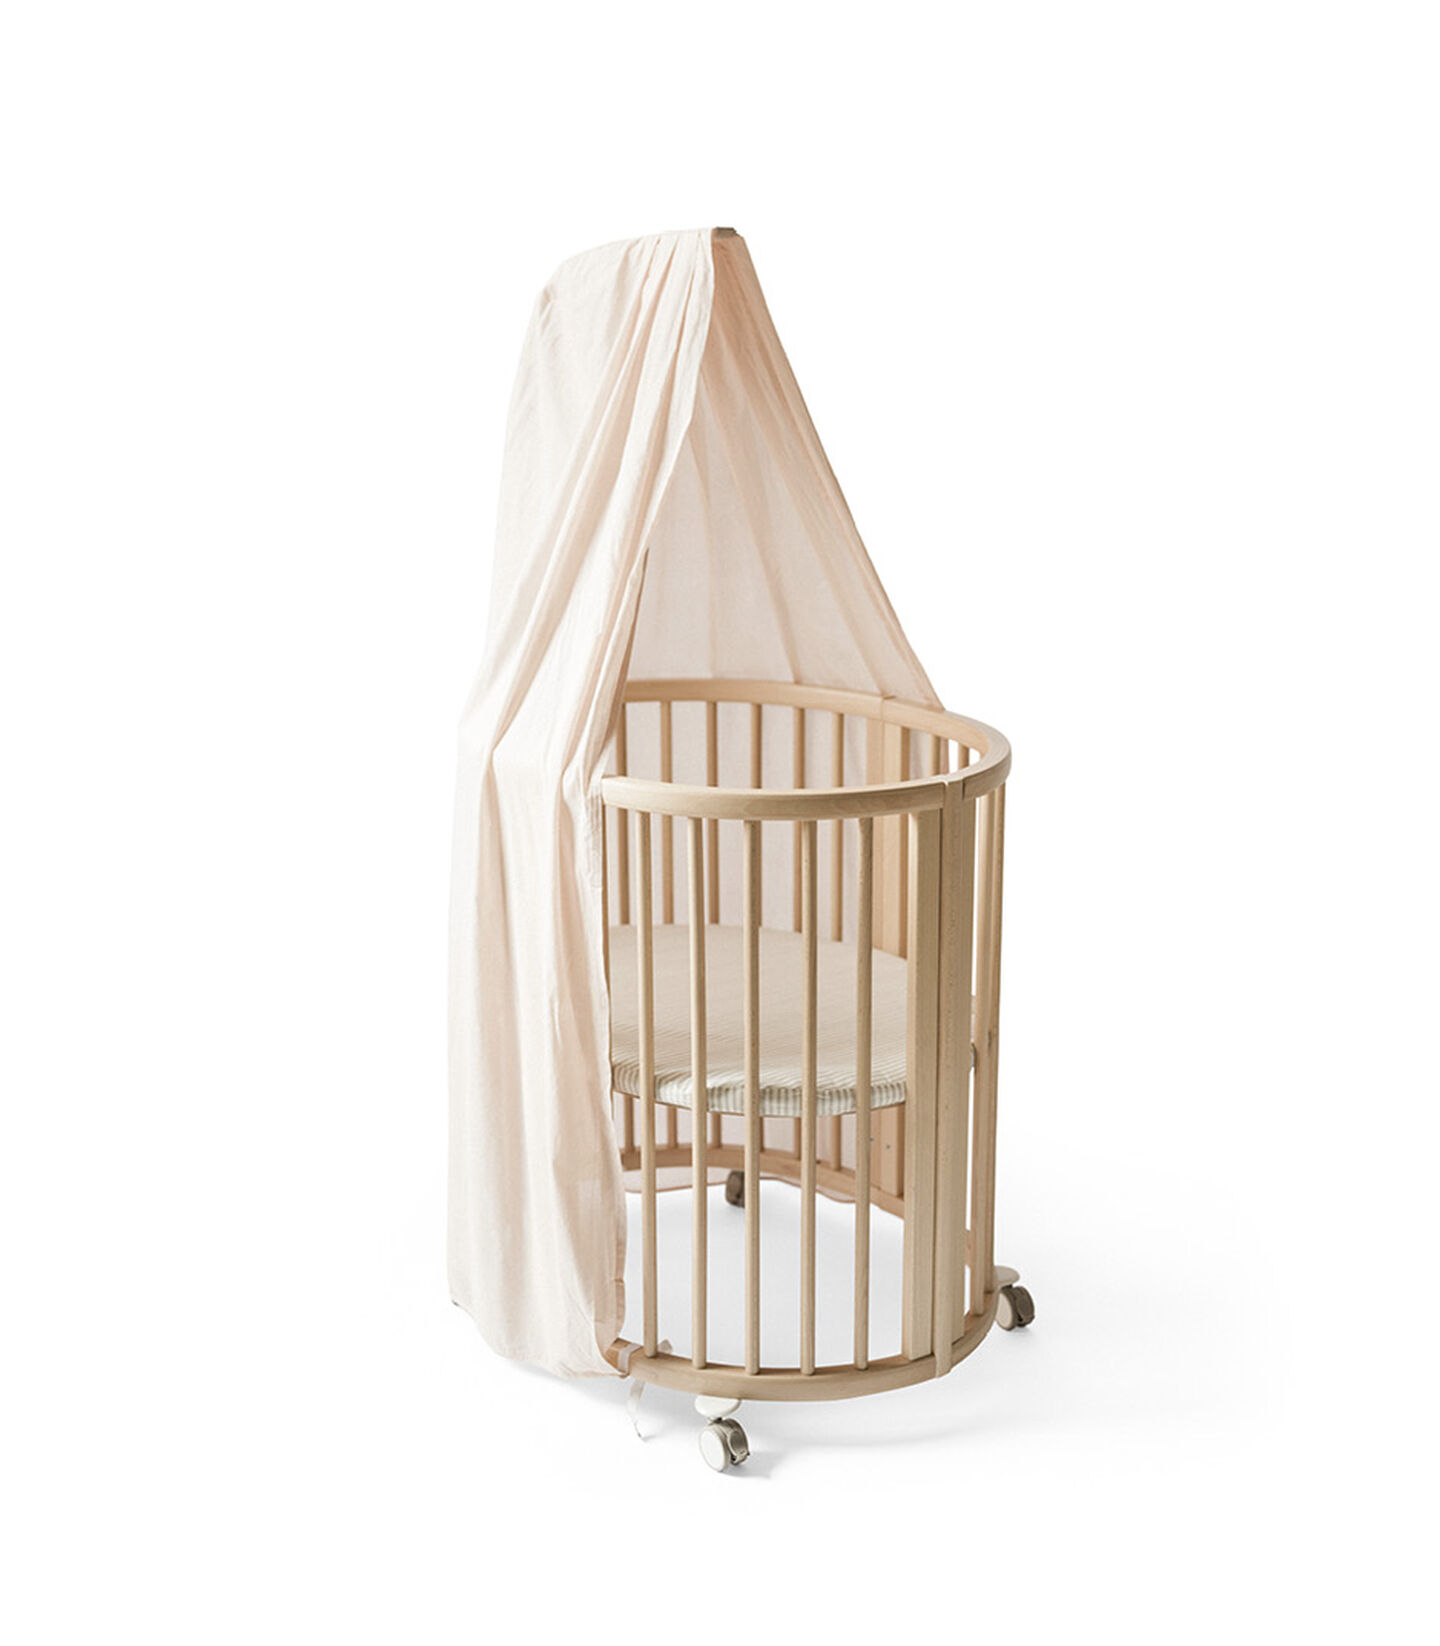 Stokke® Sleepi™ Blush Canopy by Pehr, Blush, mainview view 1